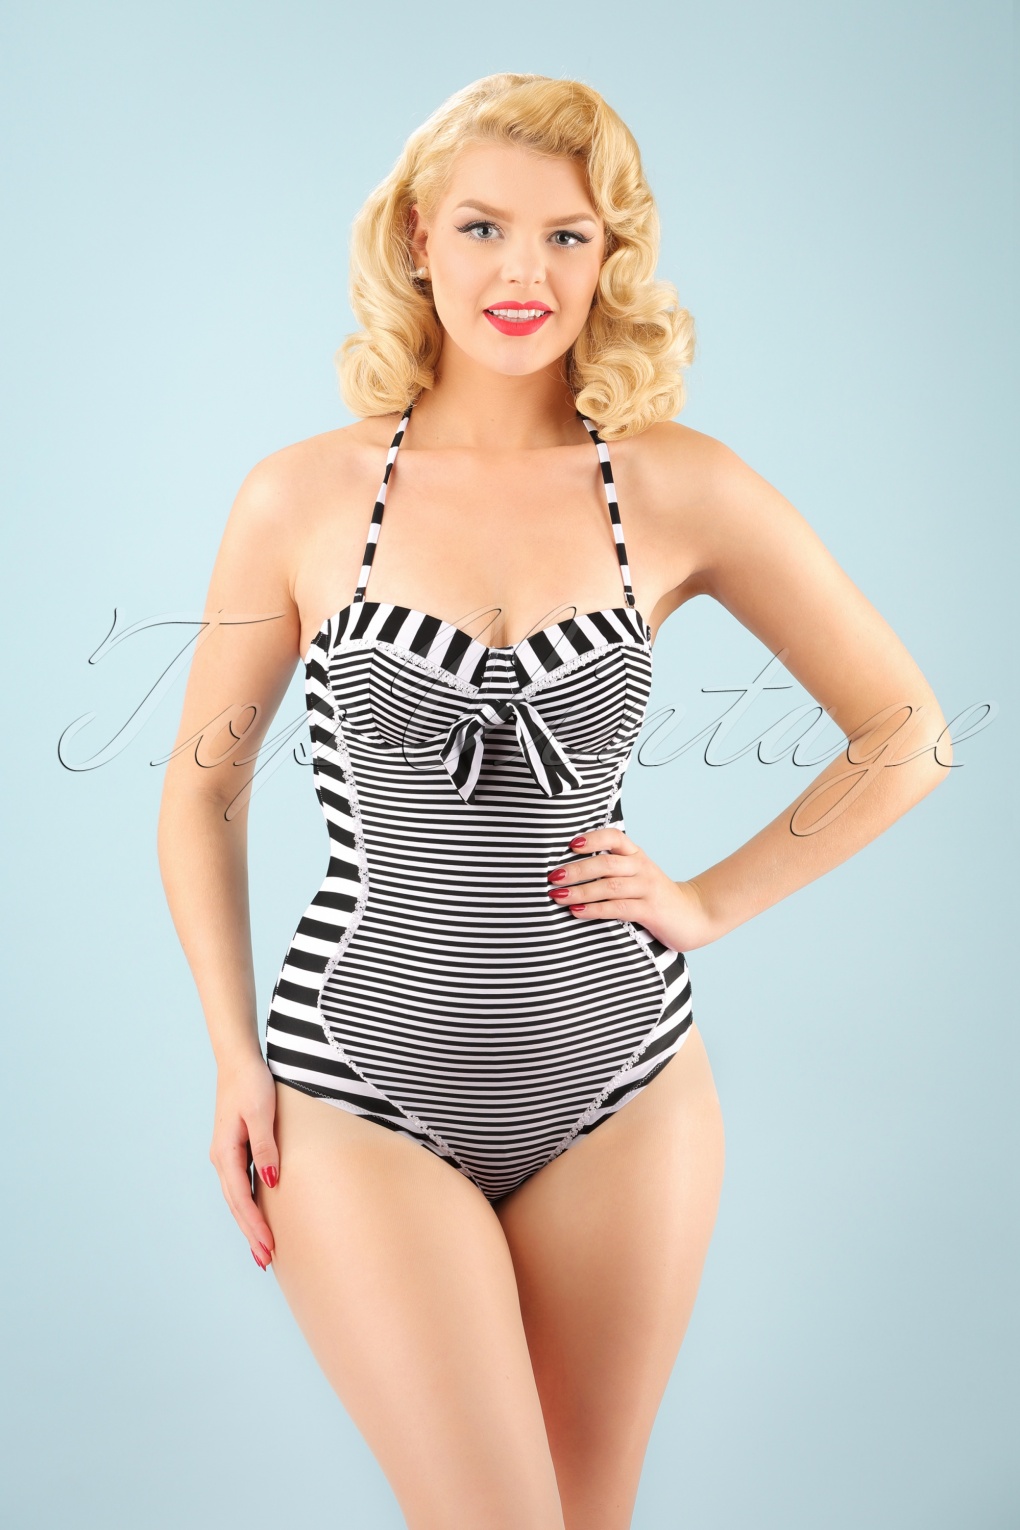 124576 Bellissima Red And White Striped Bathing Suit 161 27 21177 20170207 1W Full 